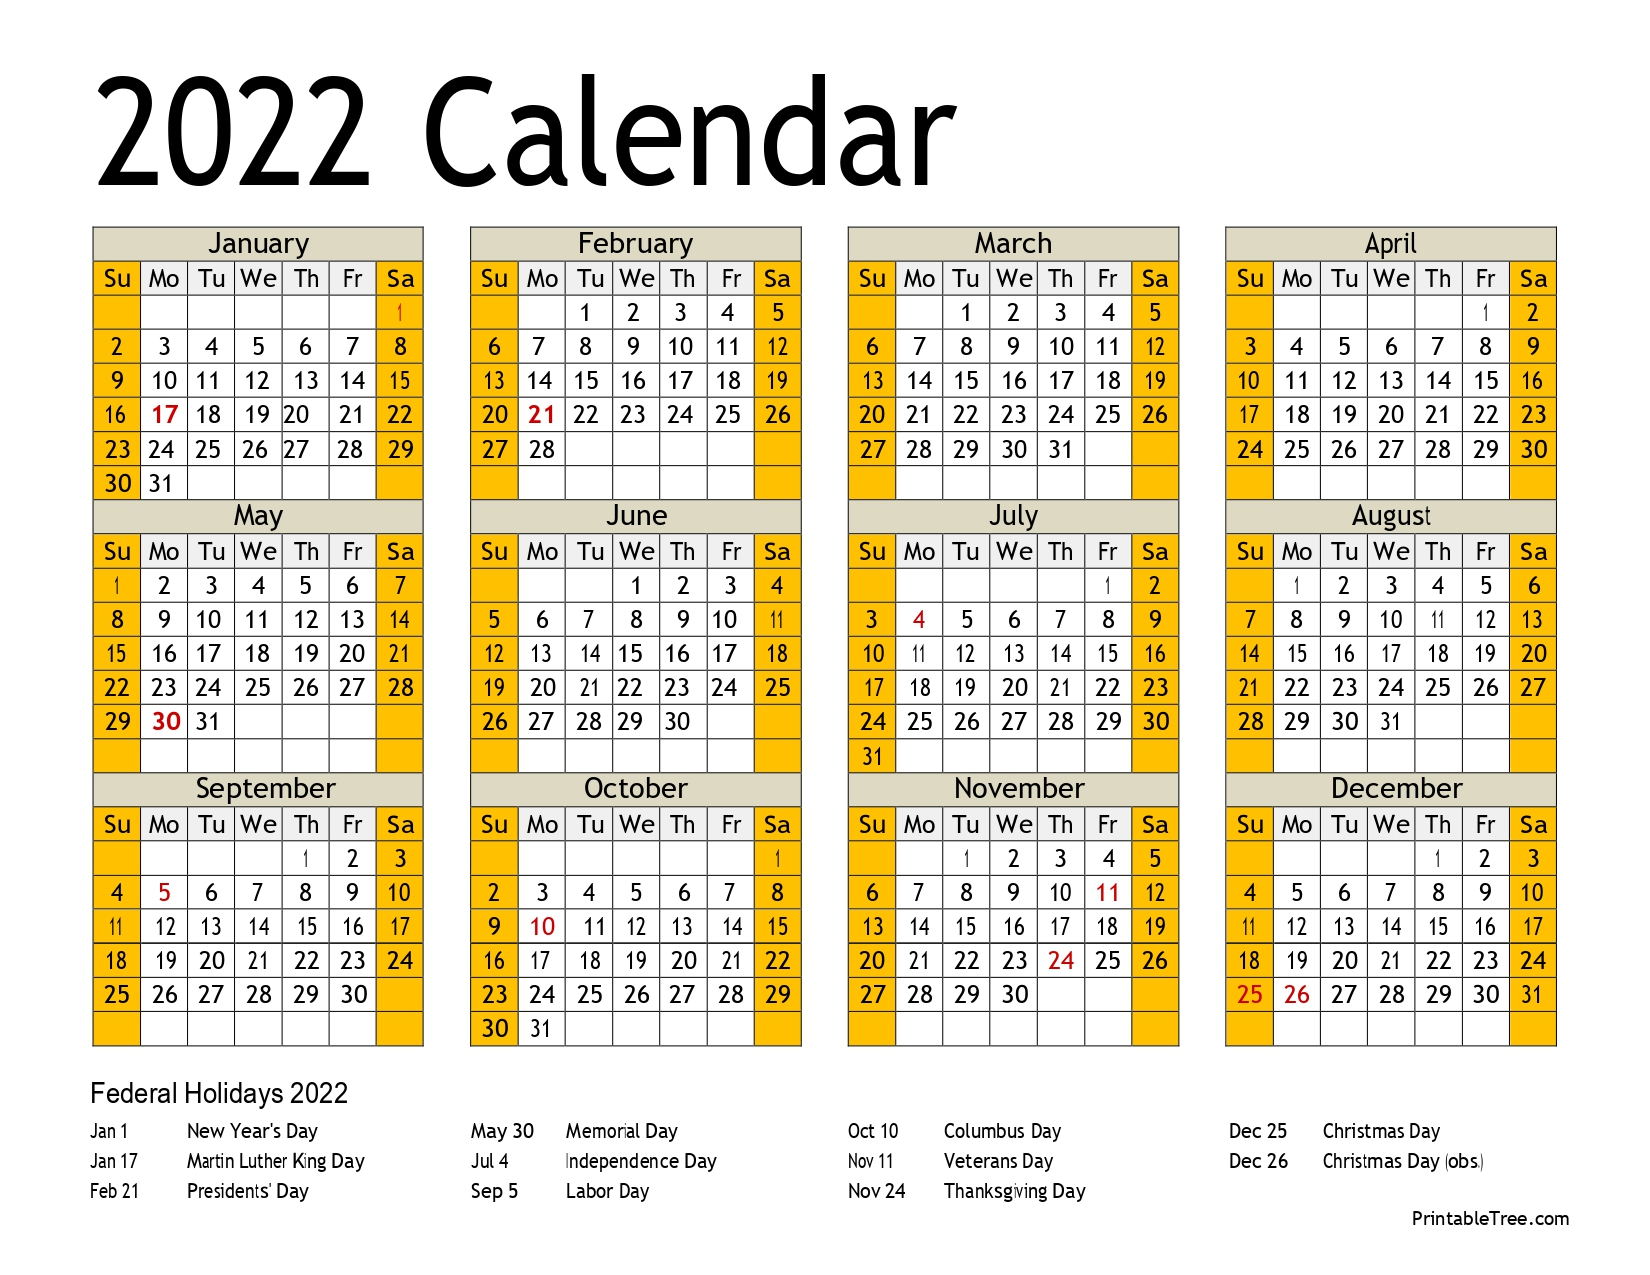 View Calendar 2022 Hd Pictures - All In Here